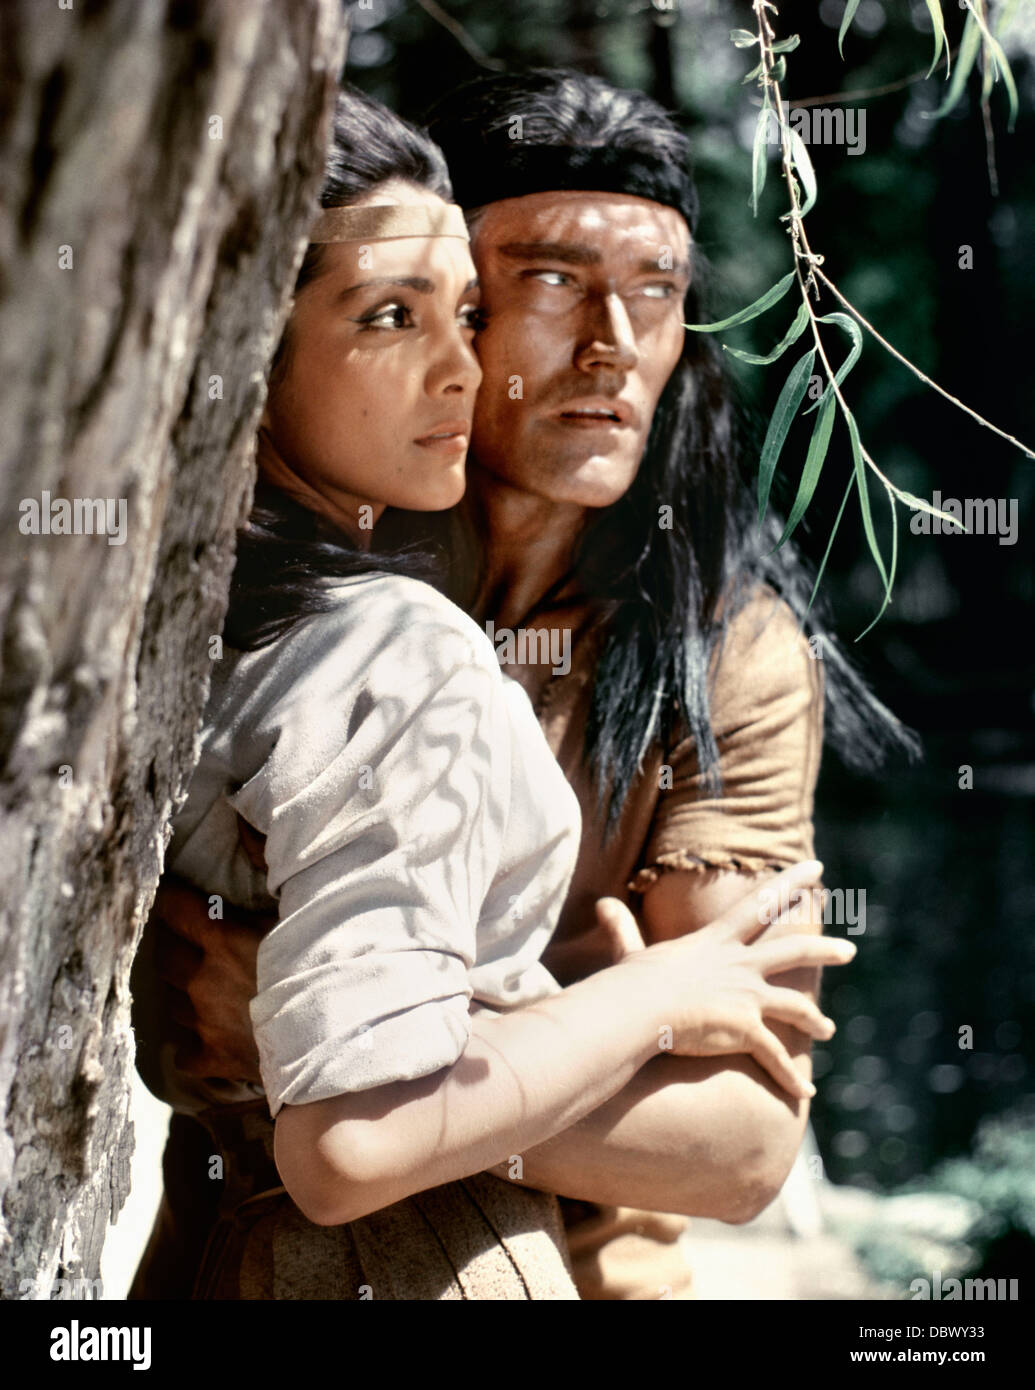 1960s 1962 FILM GERONIMO WITH CHUCK CONNORS AND KAMALA DEVI AS NATIVE AMERICANS Stock Photo